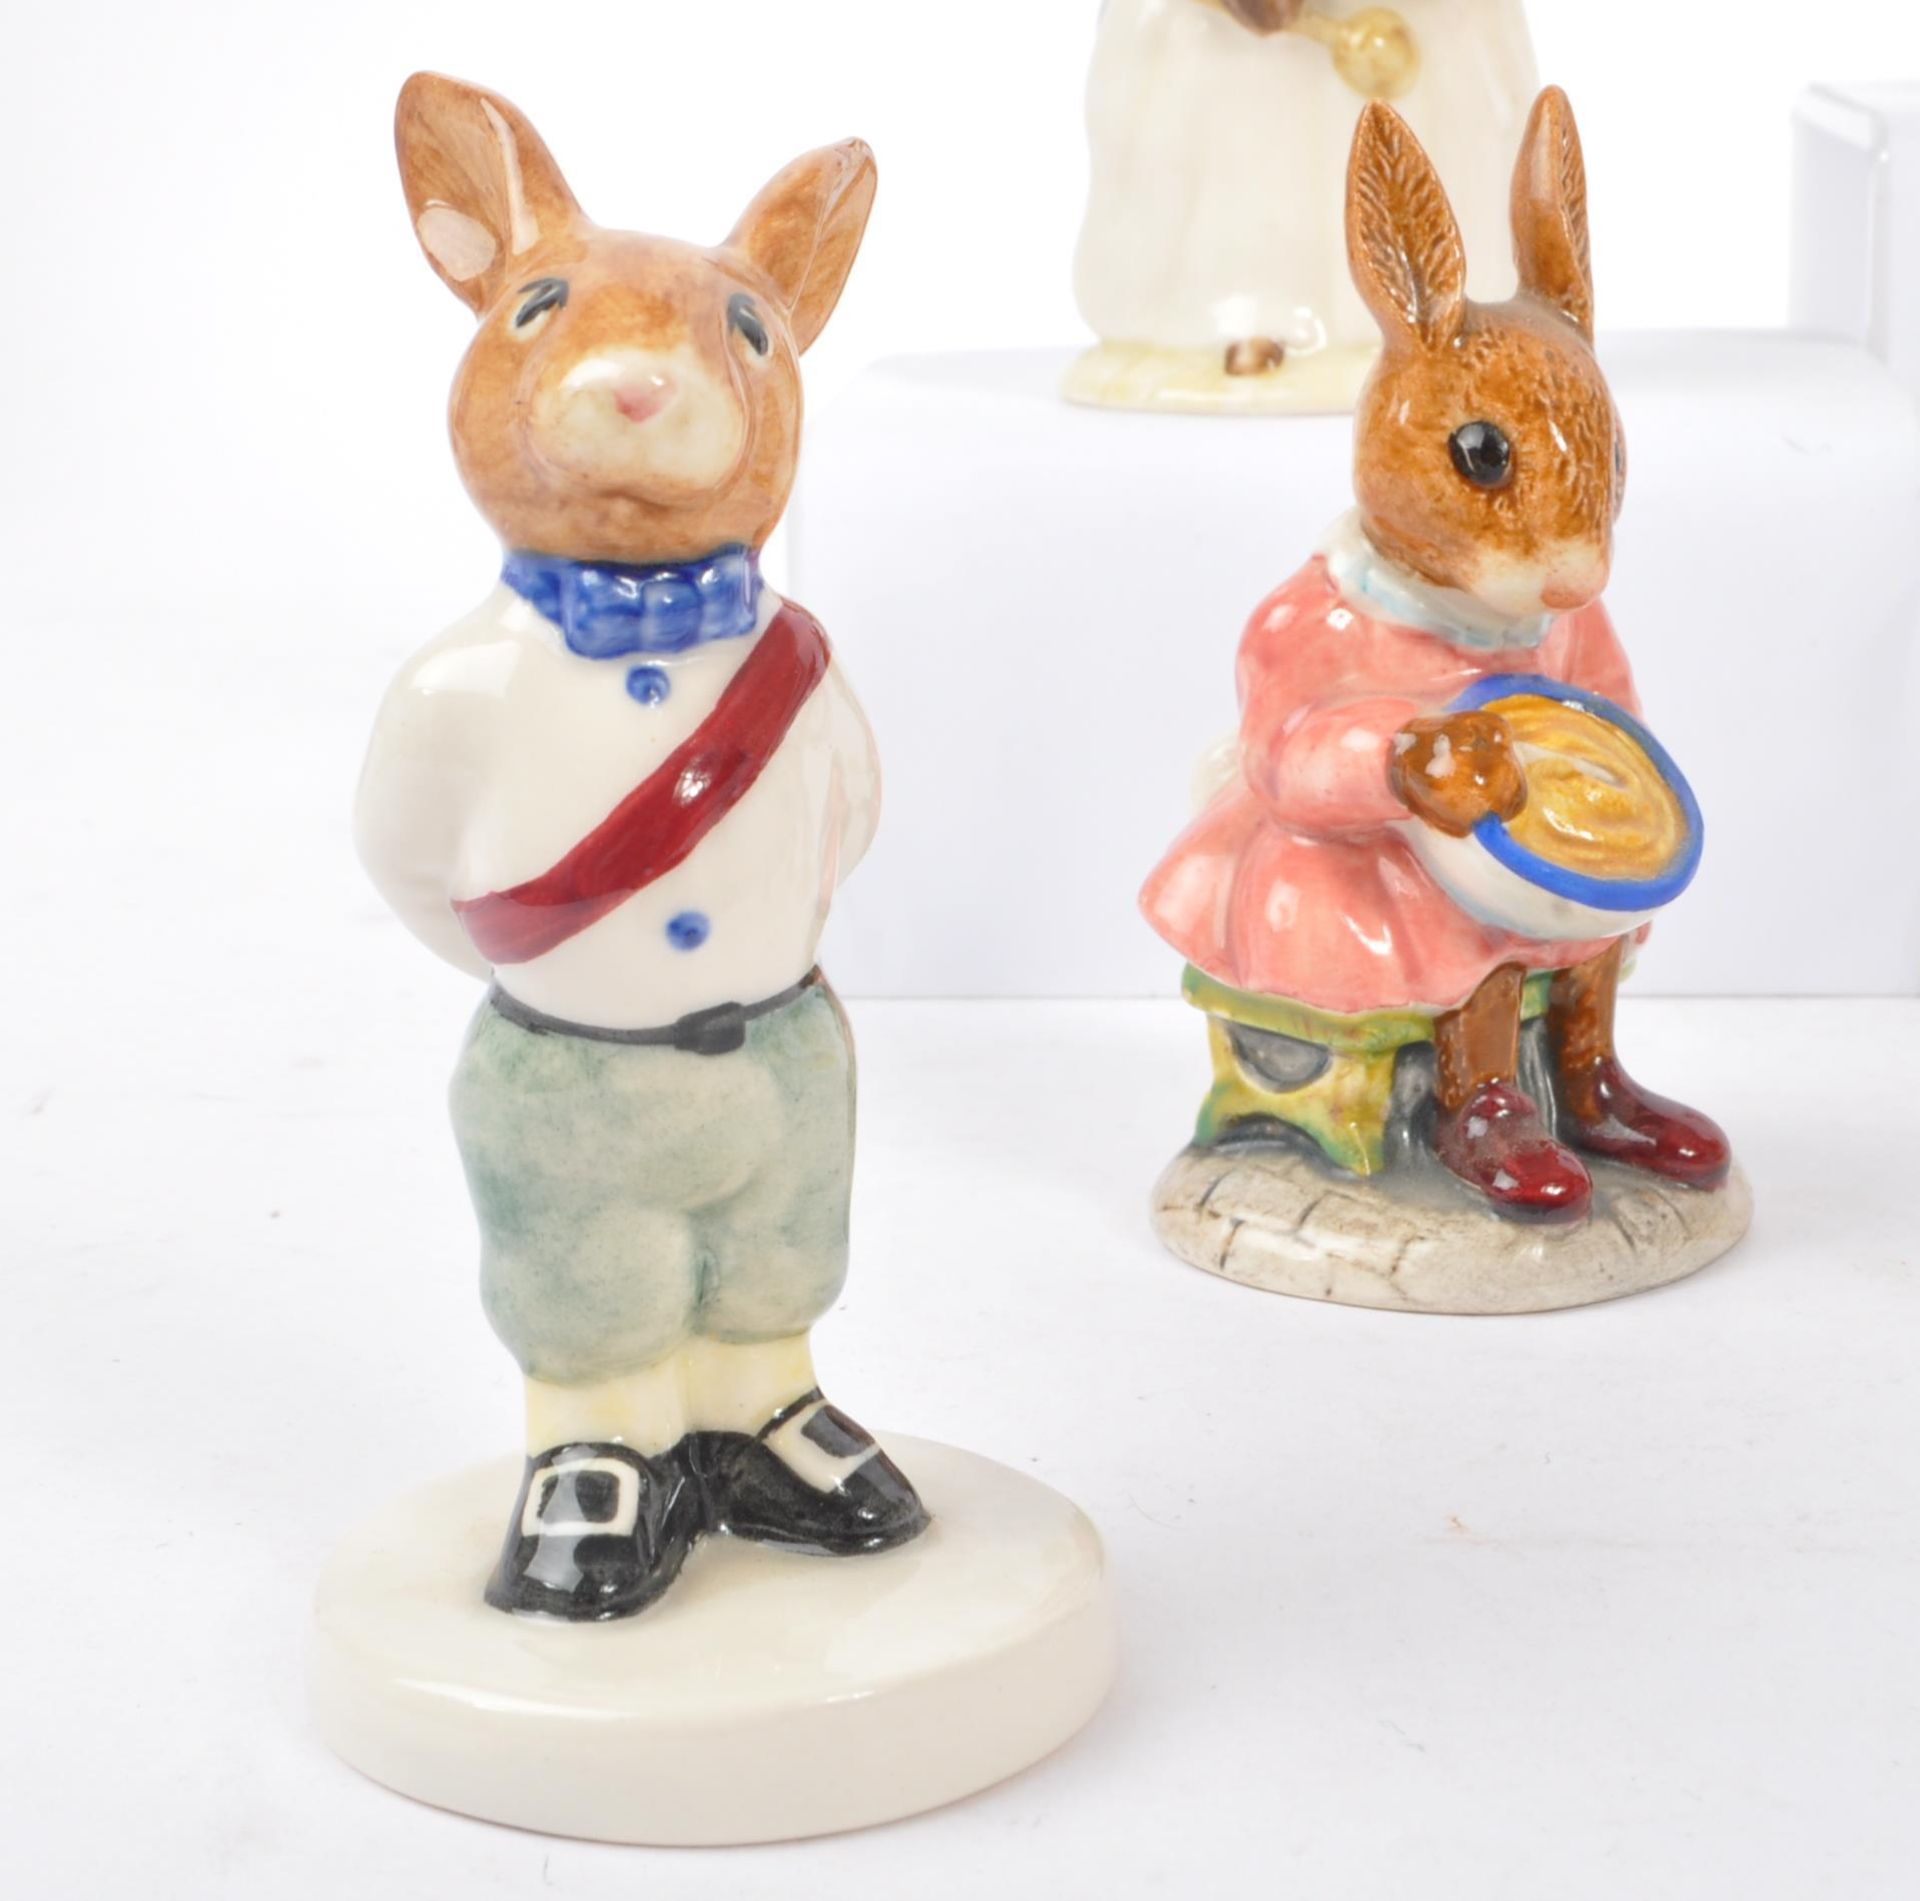 ROYAL DOULTON - BUNNYKINS - COLLECTION OF PORCELAIN FIGURES - Image 4 of 8